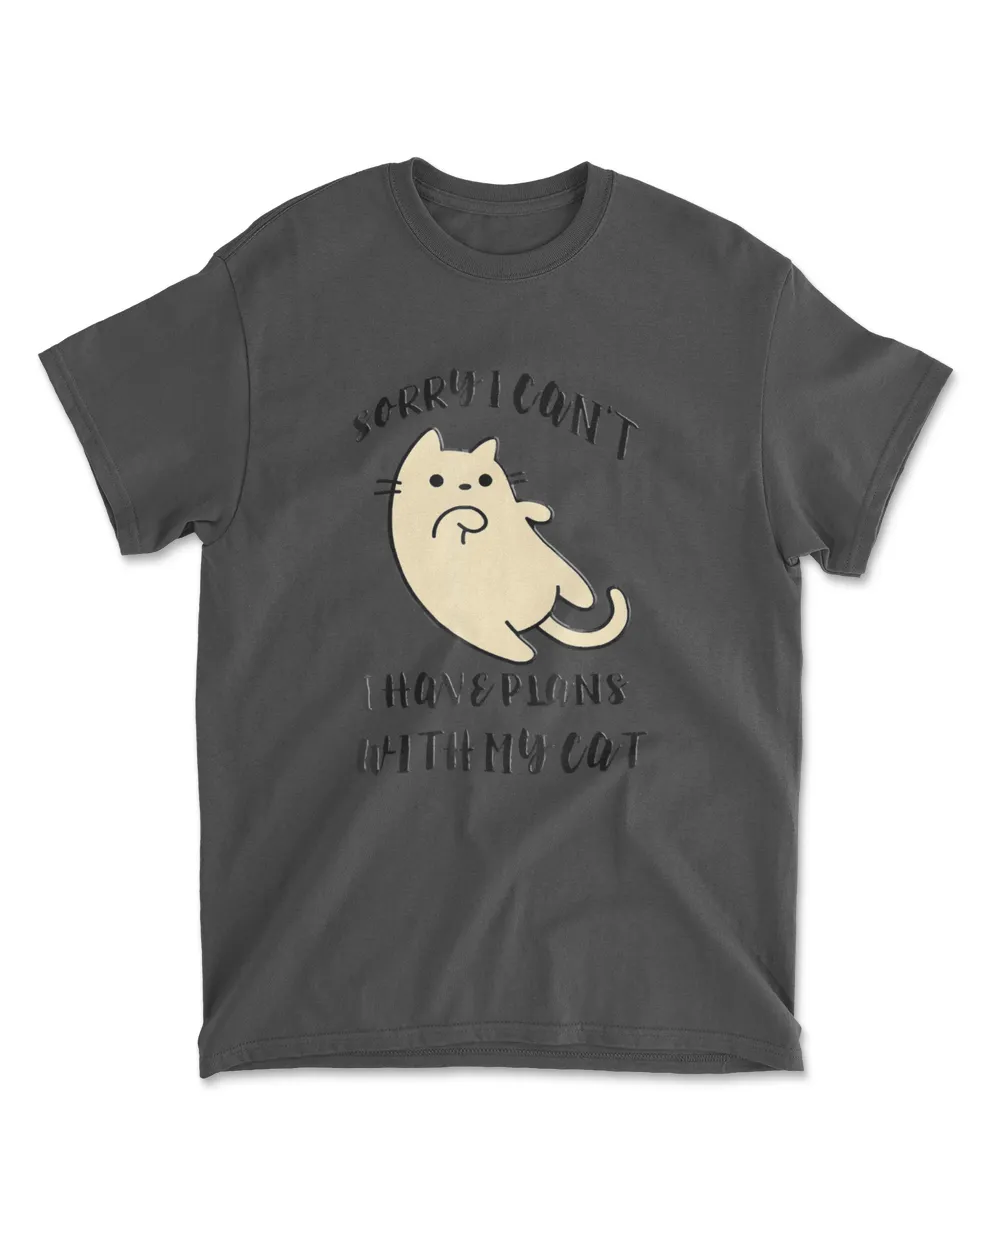 Sorry I Cant I Have Plans With My Cat T Shirt